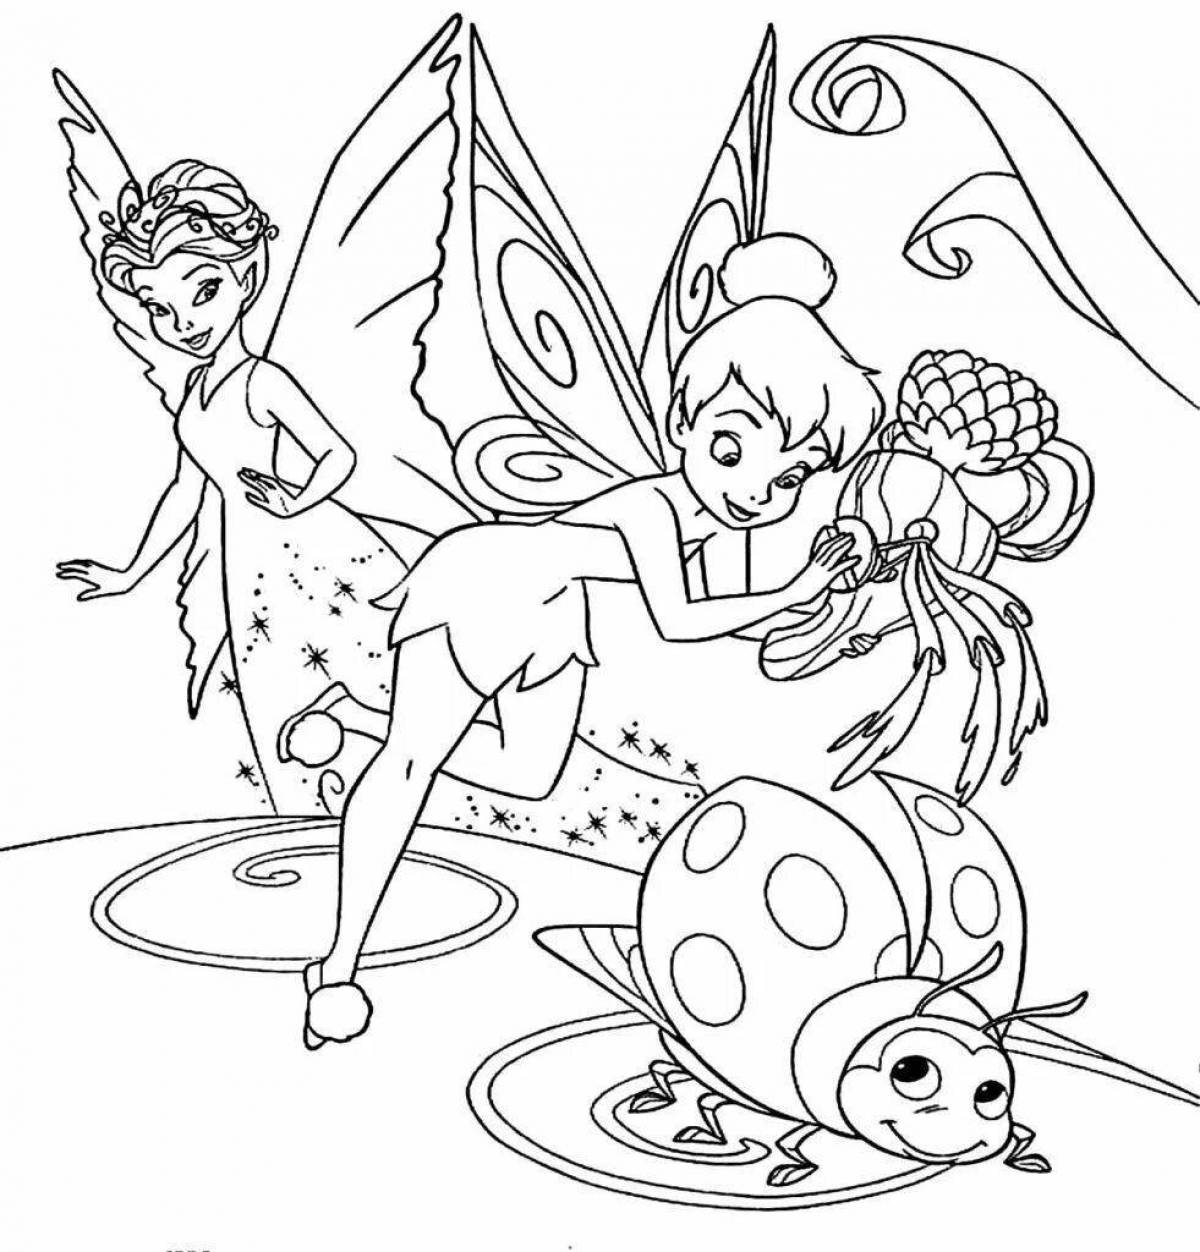 Fairy glitter coloring pages for 5-6 year olds